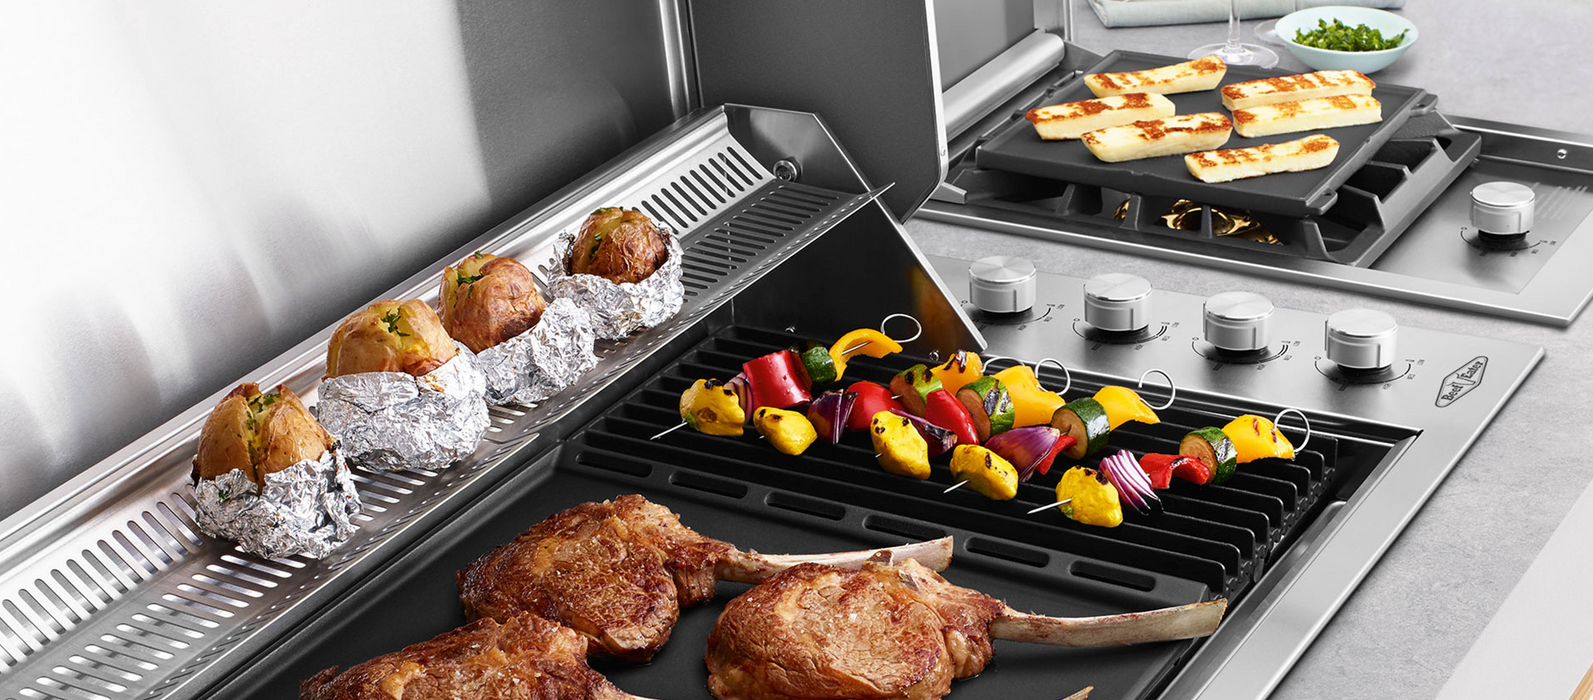 Commercial and Residential BBQ Equipment - Proline Equipment